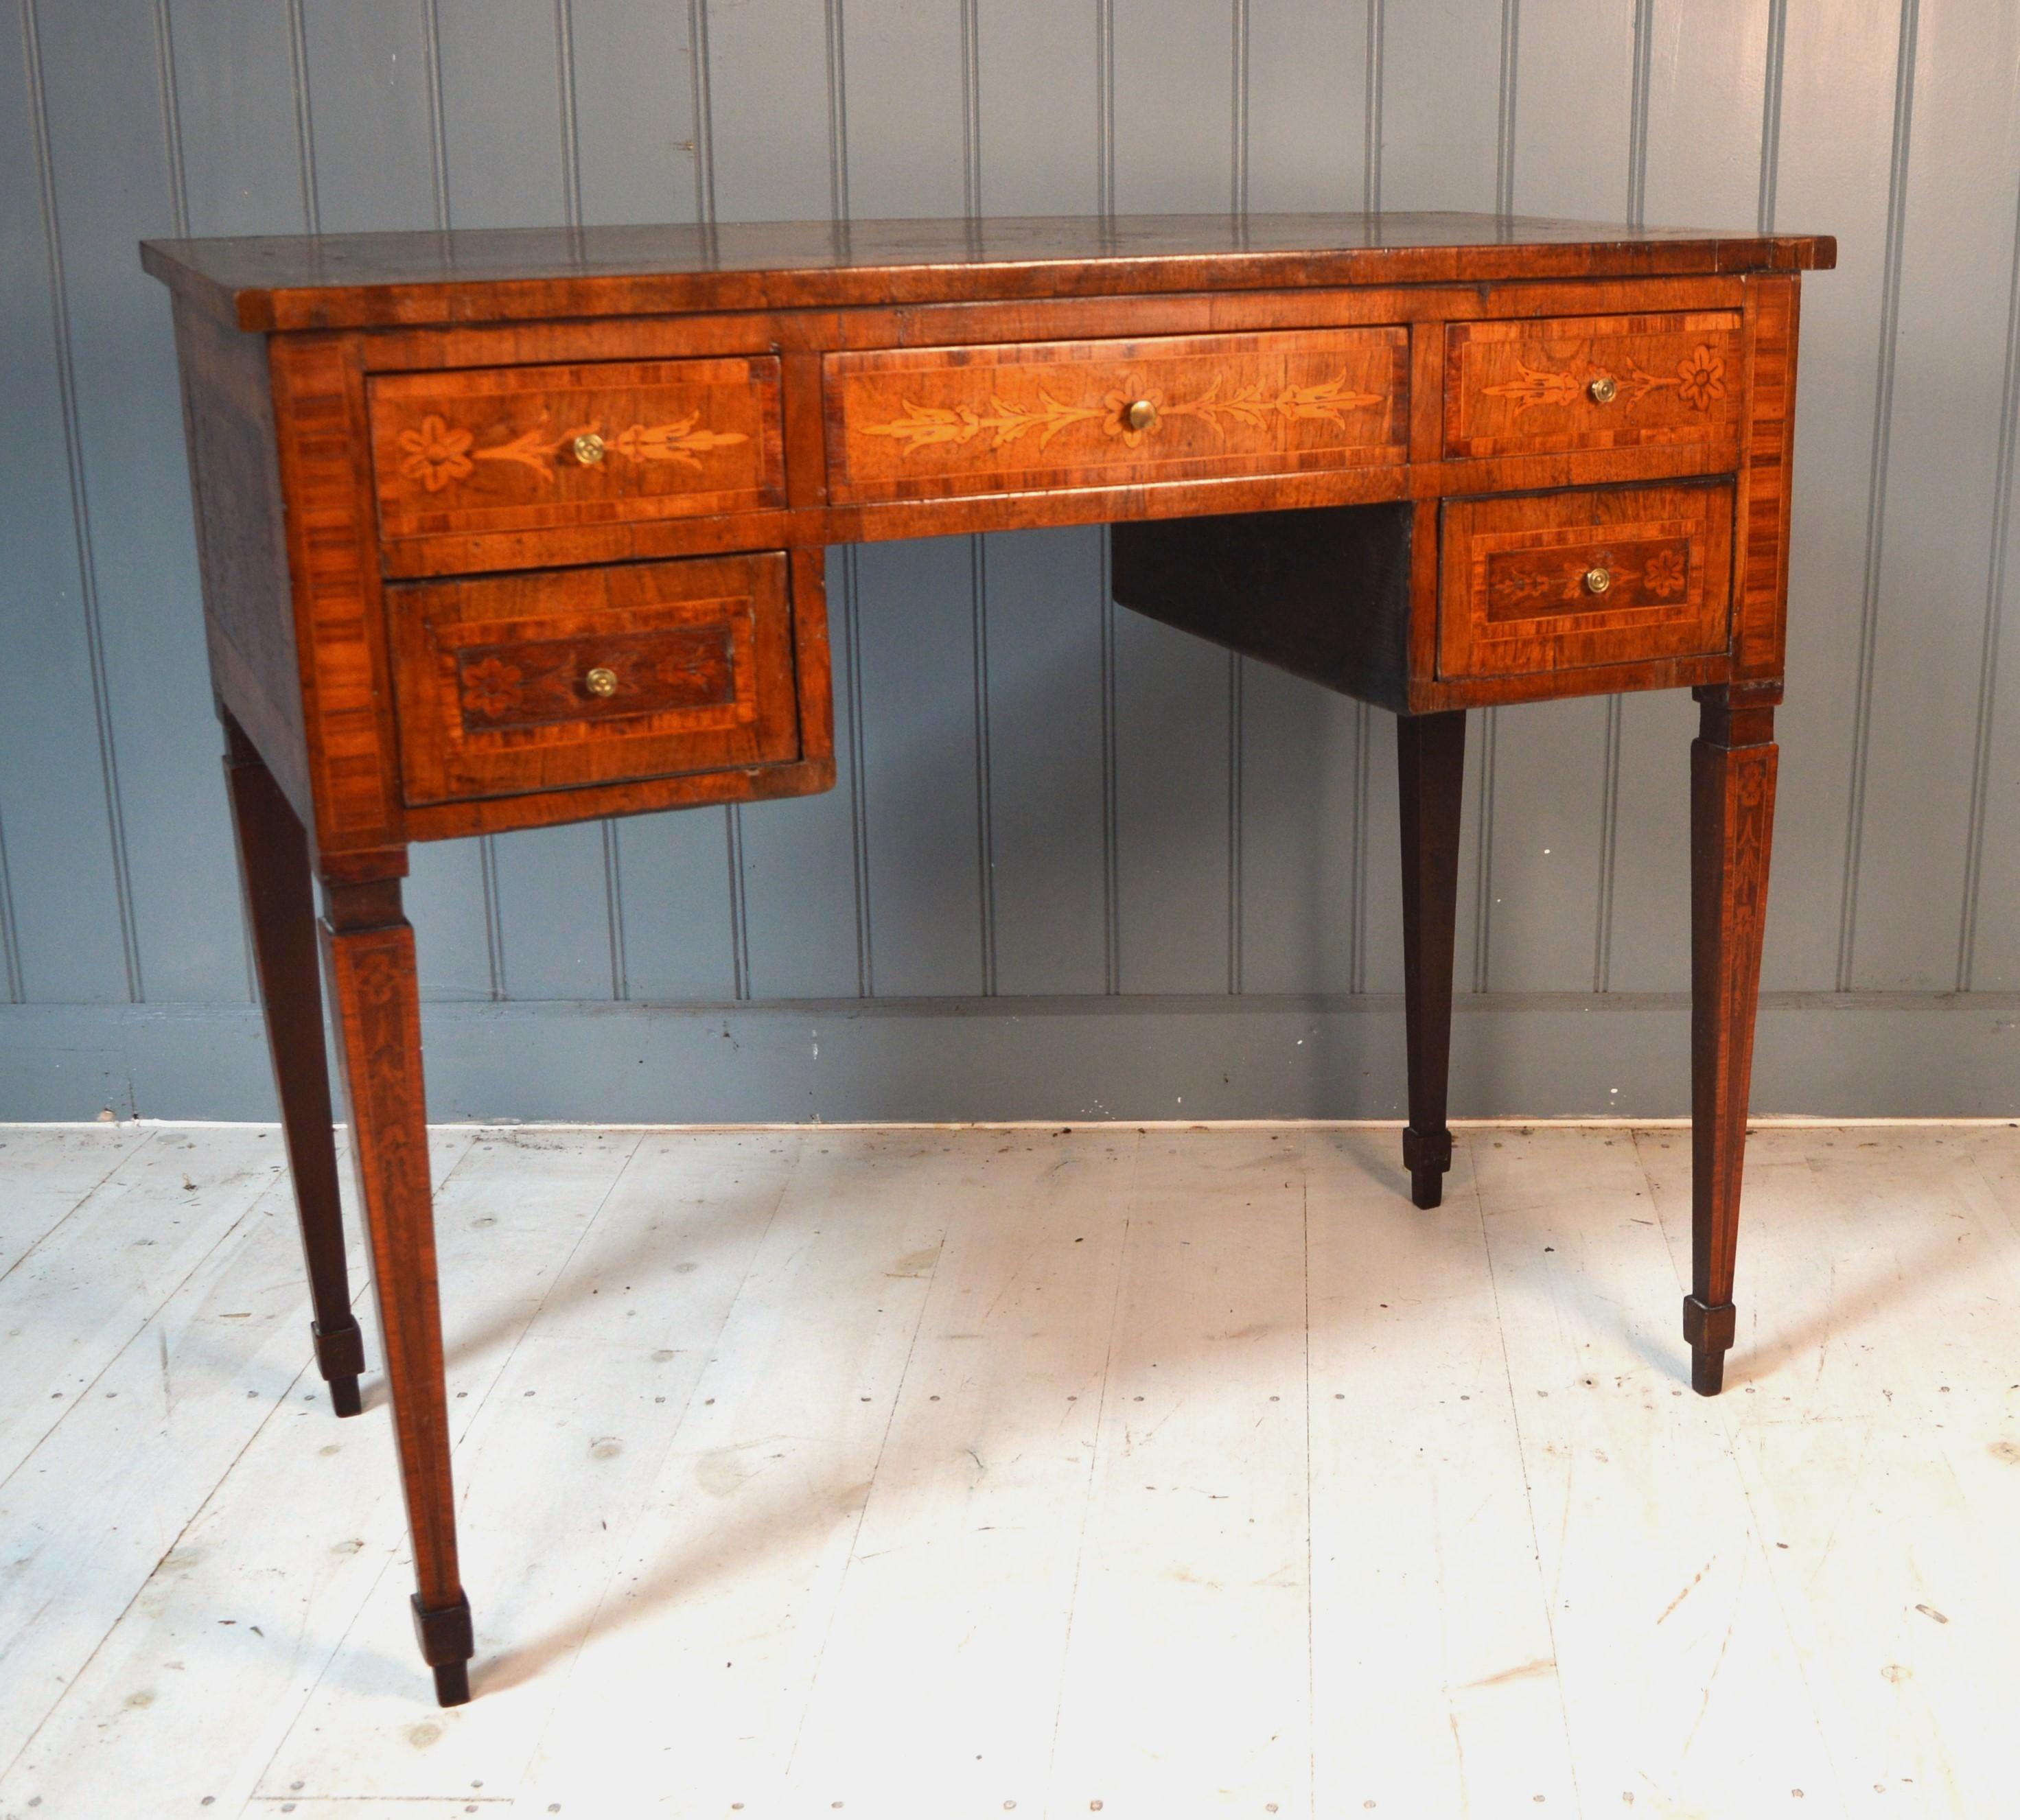 Early 19th century Italian marquetry writing table with five drawers. Various timbers in the marquetry including kingwood, walnut, box and tulip. This piece has a fairly untouched country house finish and is not repolished. It was bought from a